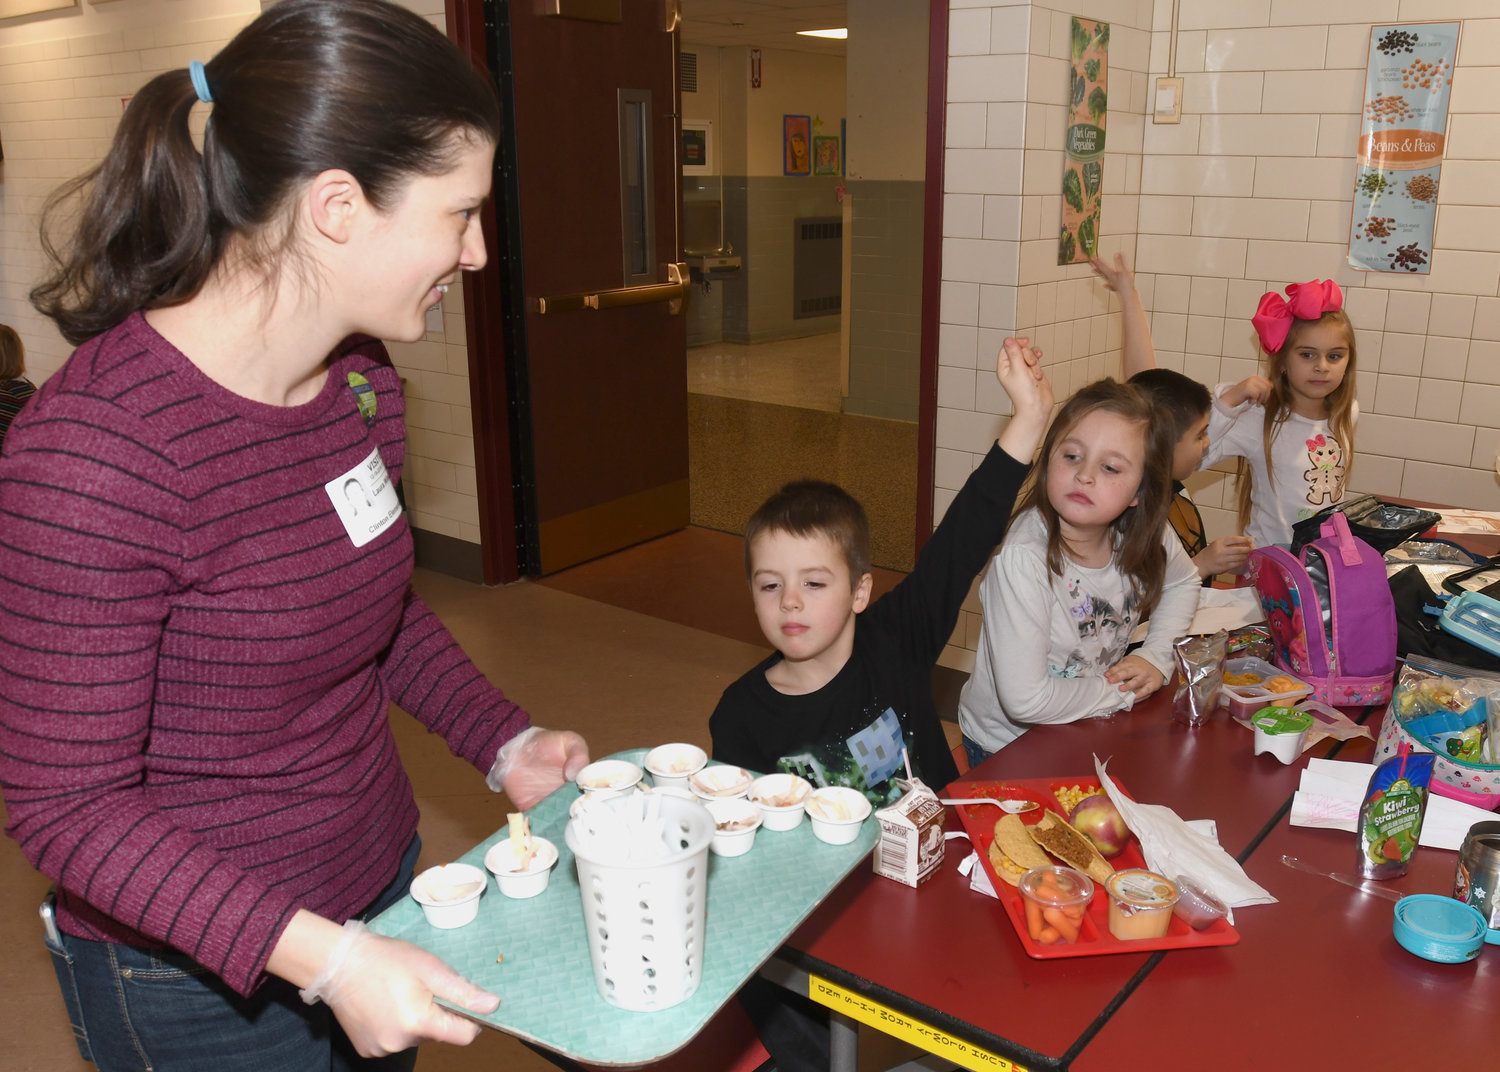 LET ME TRY — Parent volunteer Laura Wileczka hands out cups with the Farm to School “Harvest of the Month” program’s Asian Cabbage Slaw that was offered to children at Clinton Elementary School on Dec. 18.